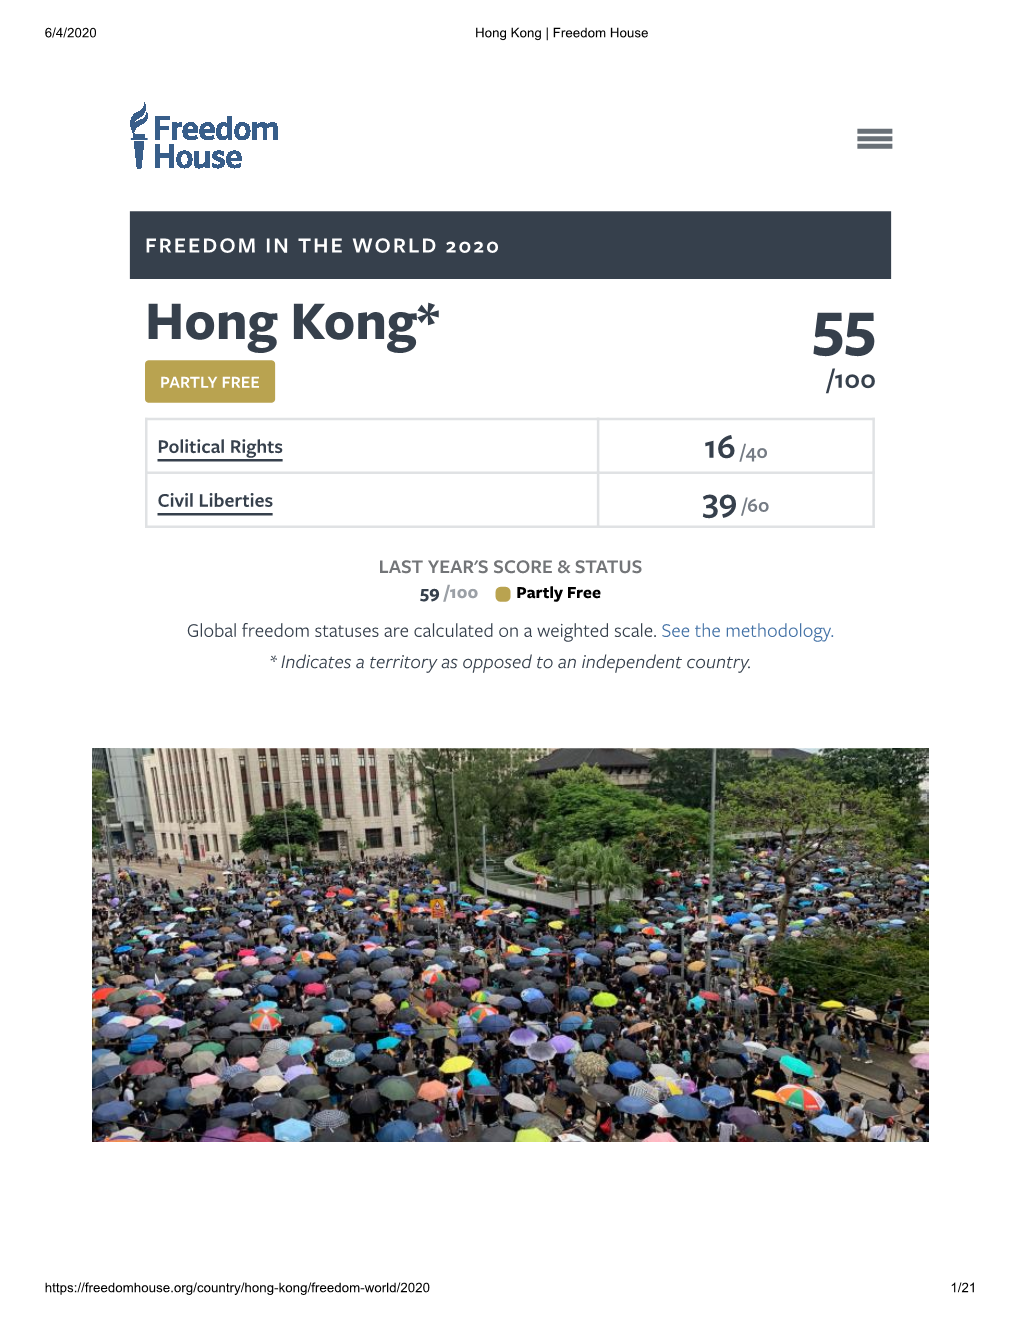 FREEDOM in the WORLD 2020 Hong Kong* 55 PARTLY FREE /100